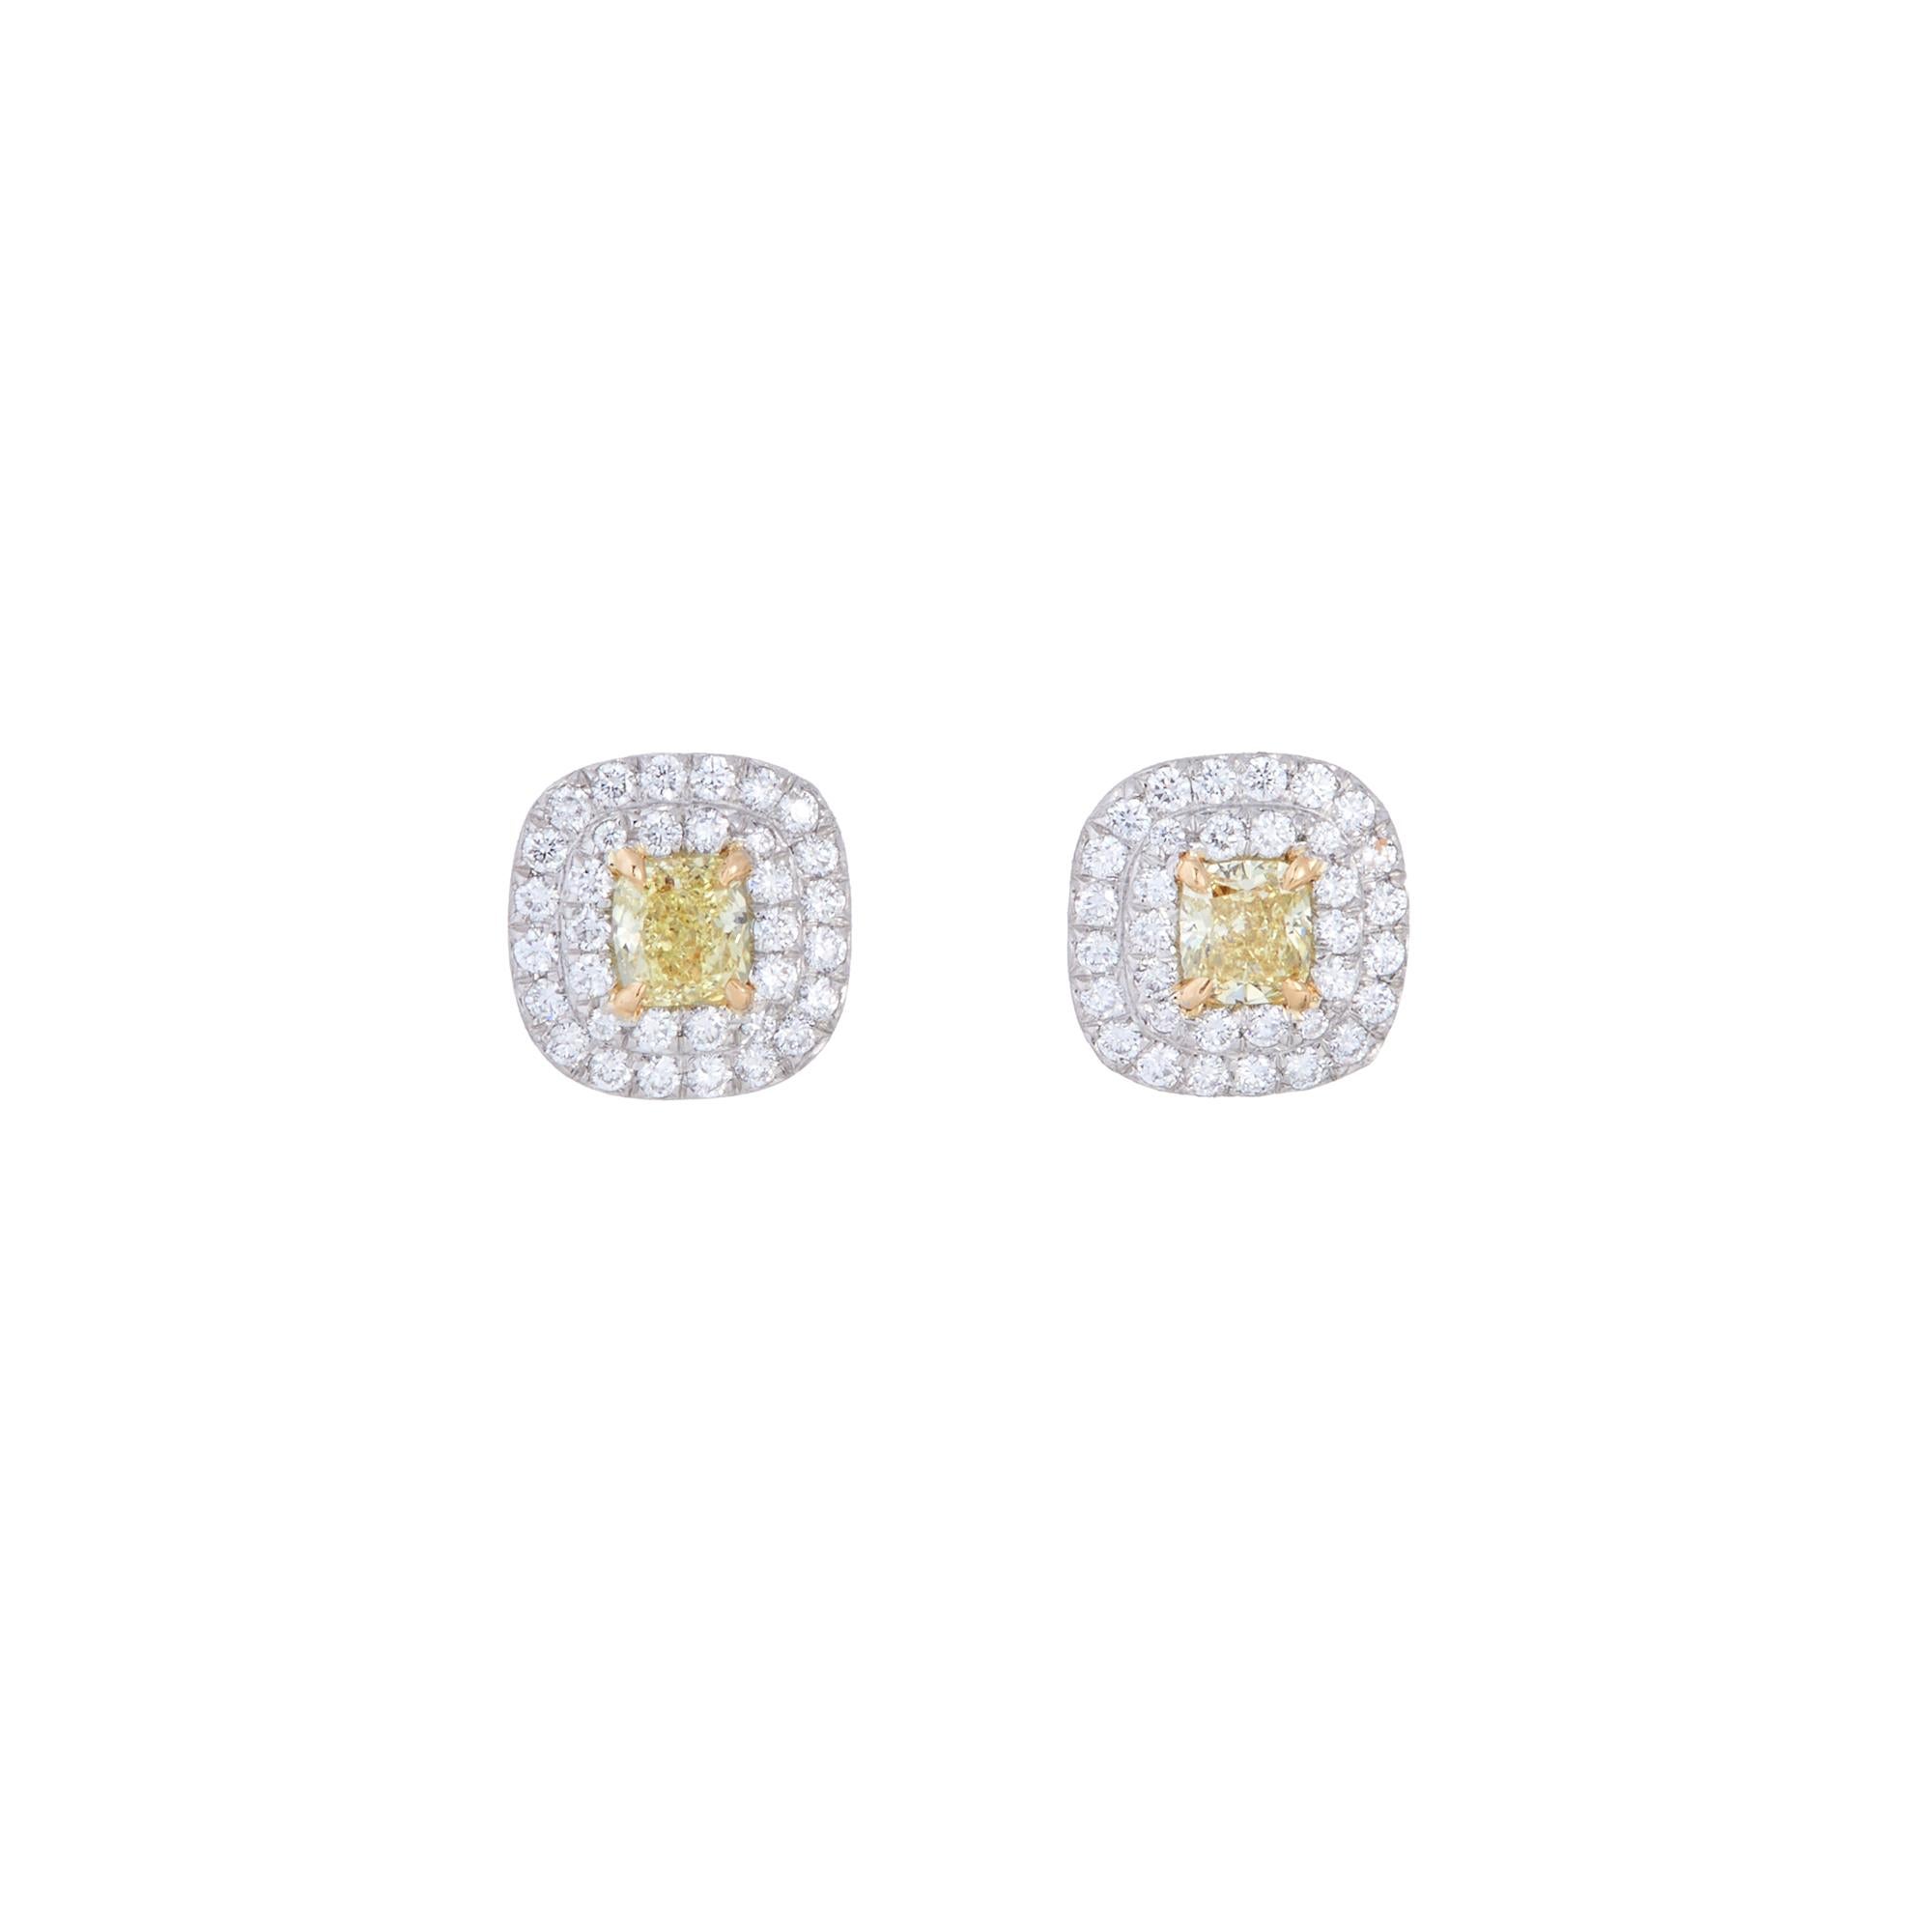 Authentic Tiffany & Co. Soleste earrings crafted in platinum.  Each earring is set with a cushion cut yellow diamond at the center surrounded by a double halo of high quality round brilliant cut diamonds for an estimated total carat weight of 0.66